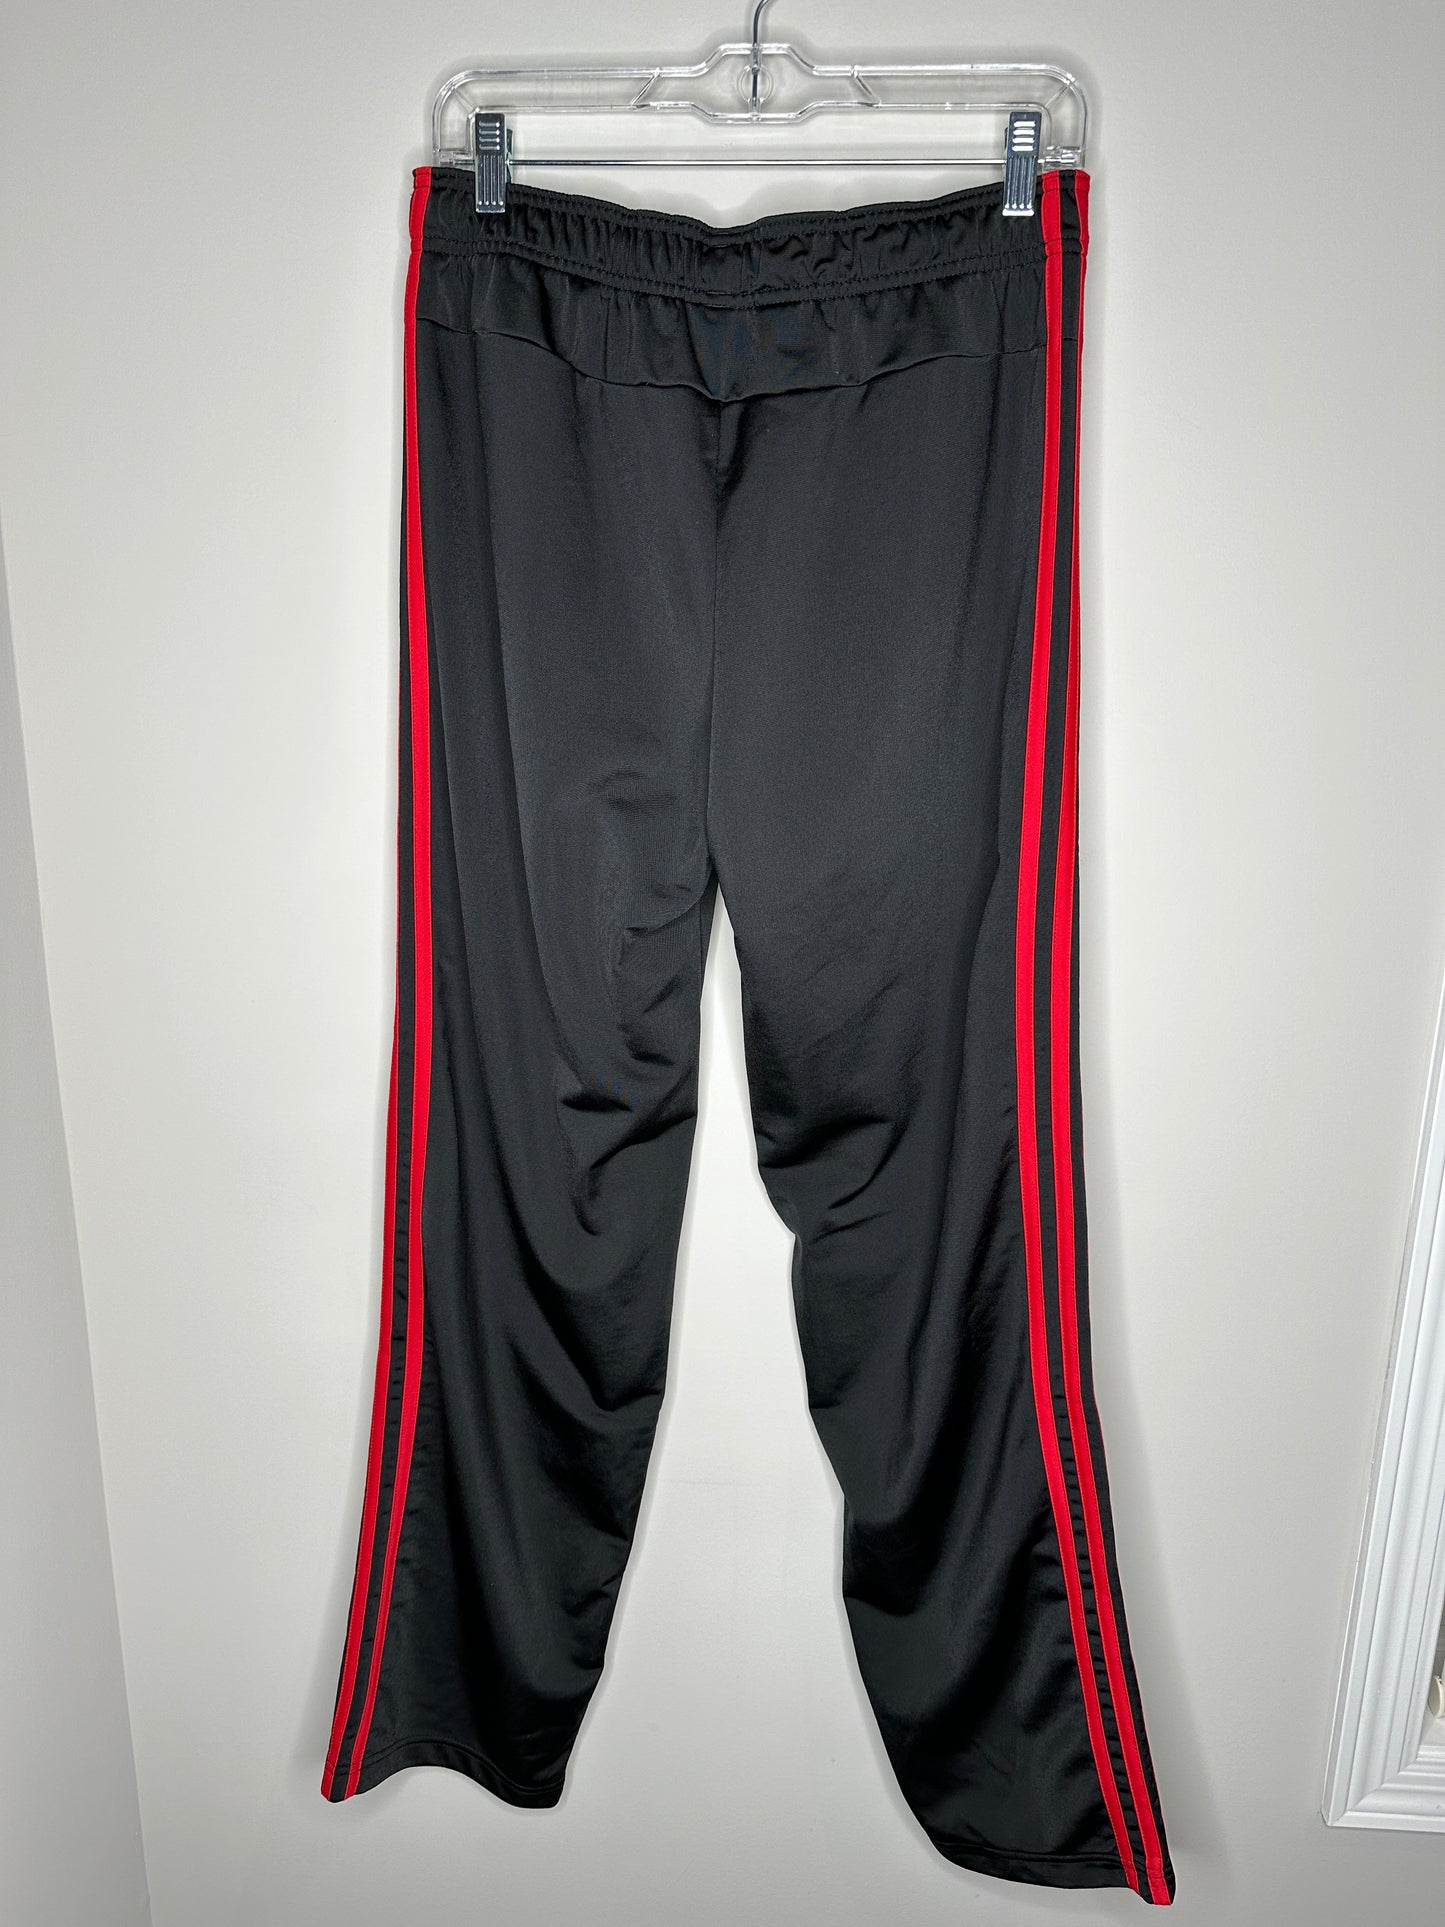 Adidas Men's Size M Black with Red Jogger Pants Joggers Athletic Pants